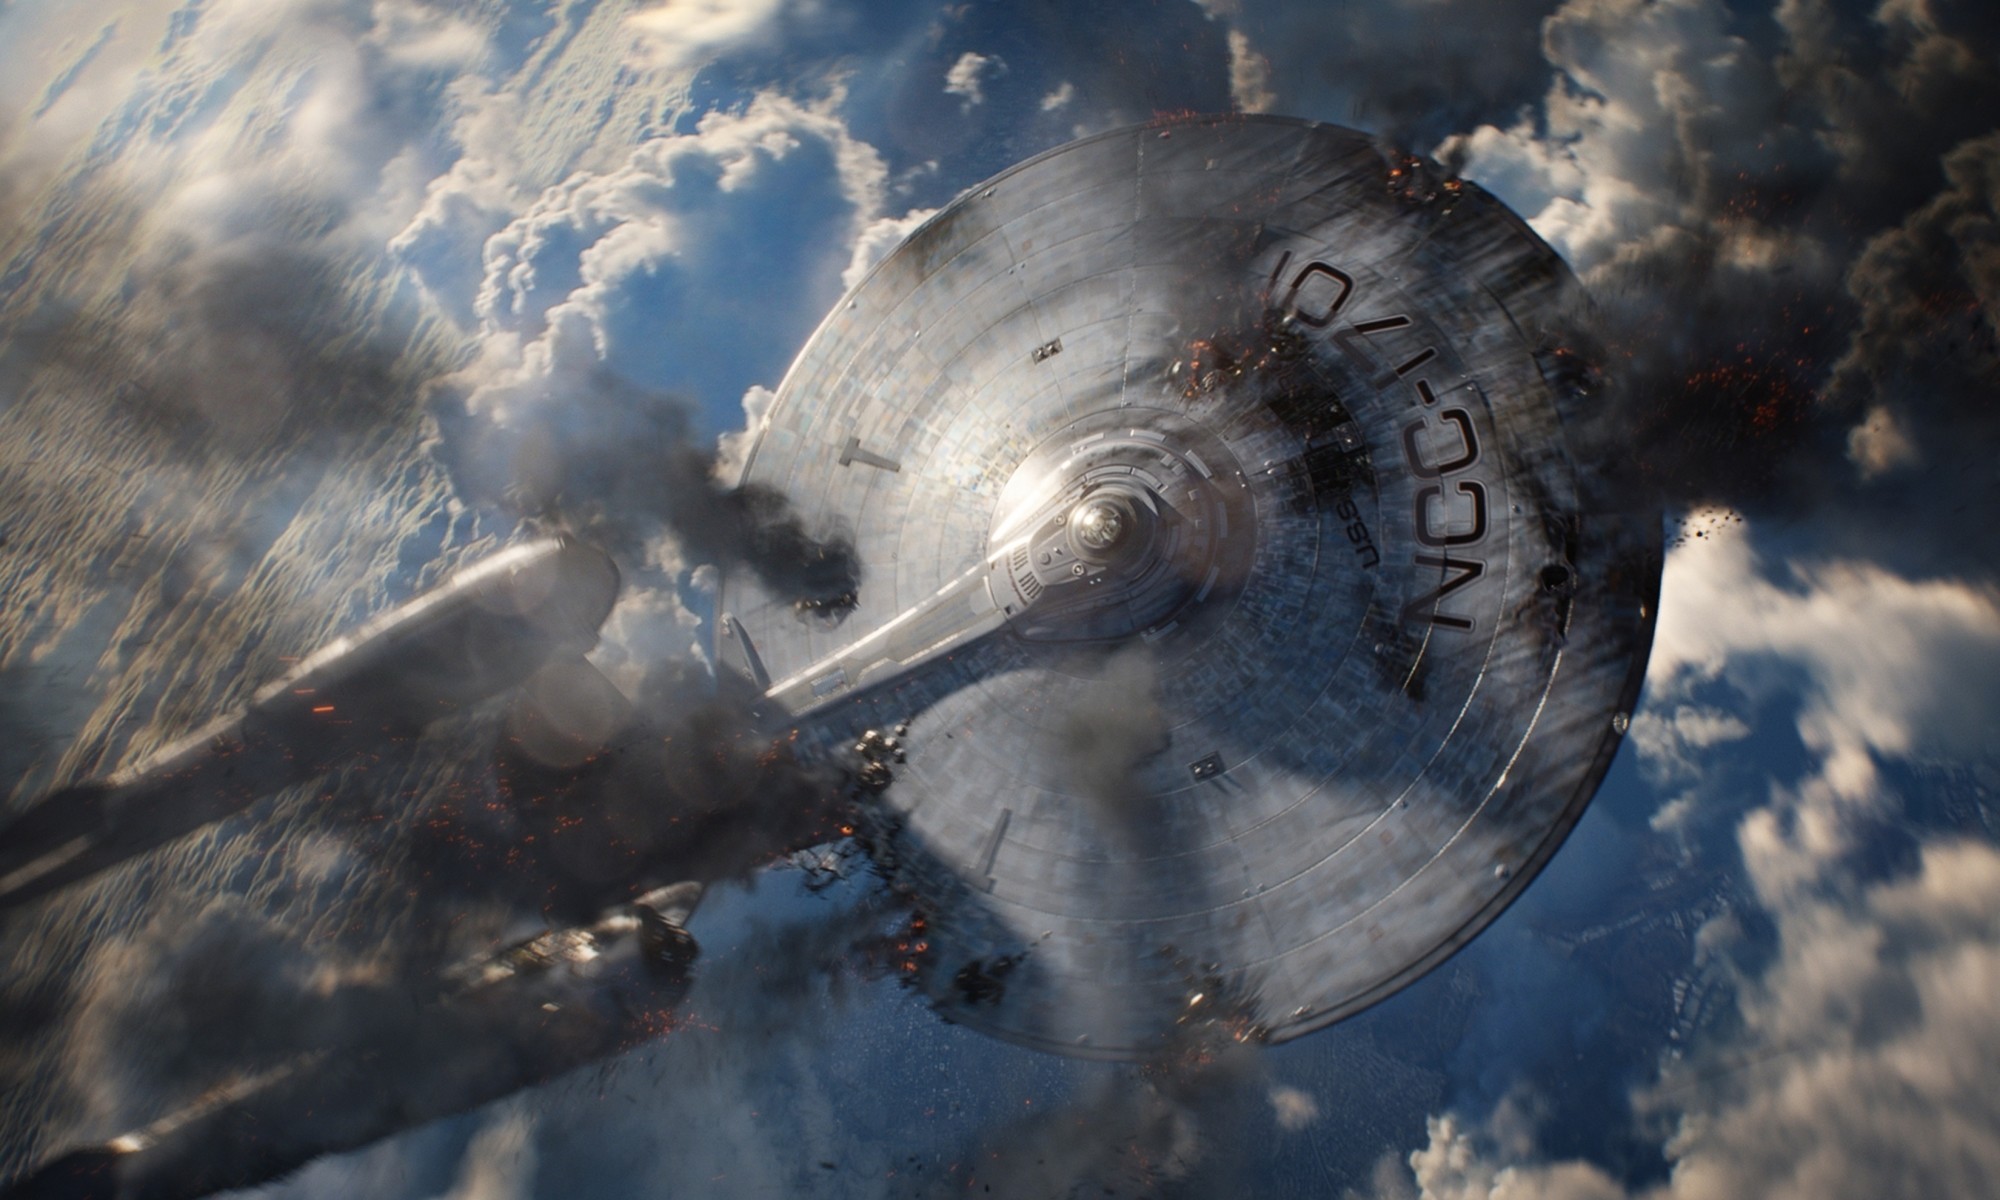 2000x1200 75 Star Trek Into Darkness HD Wallpapers | Backgrounds - Wallpaper Abyss